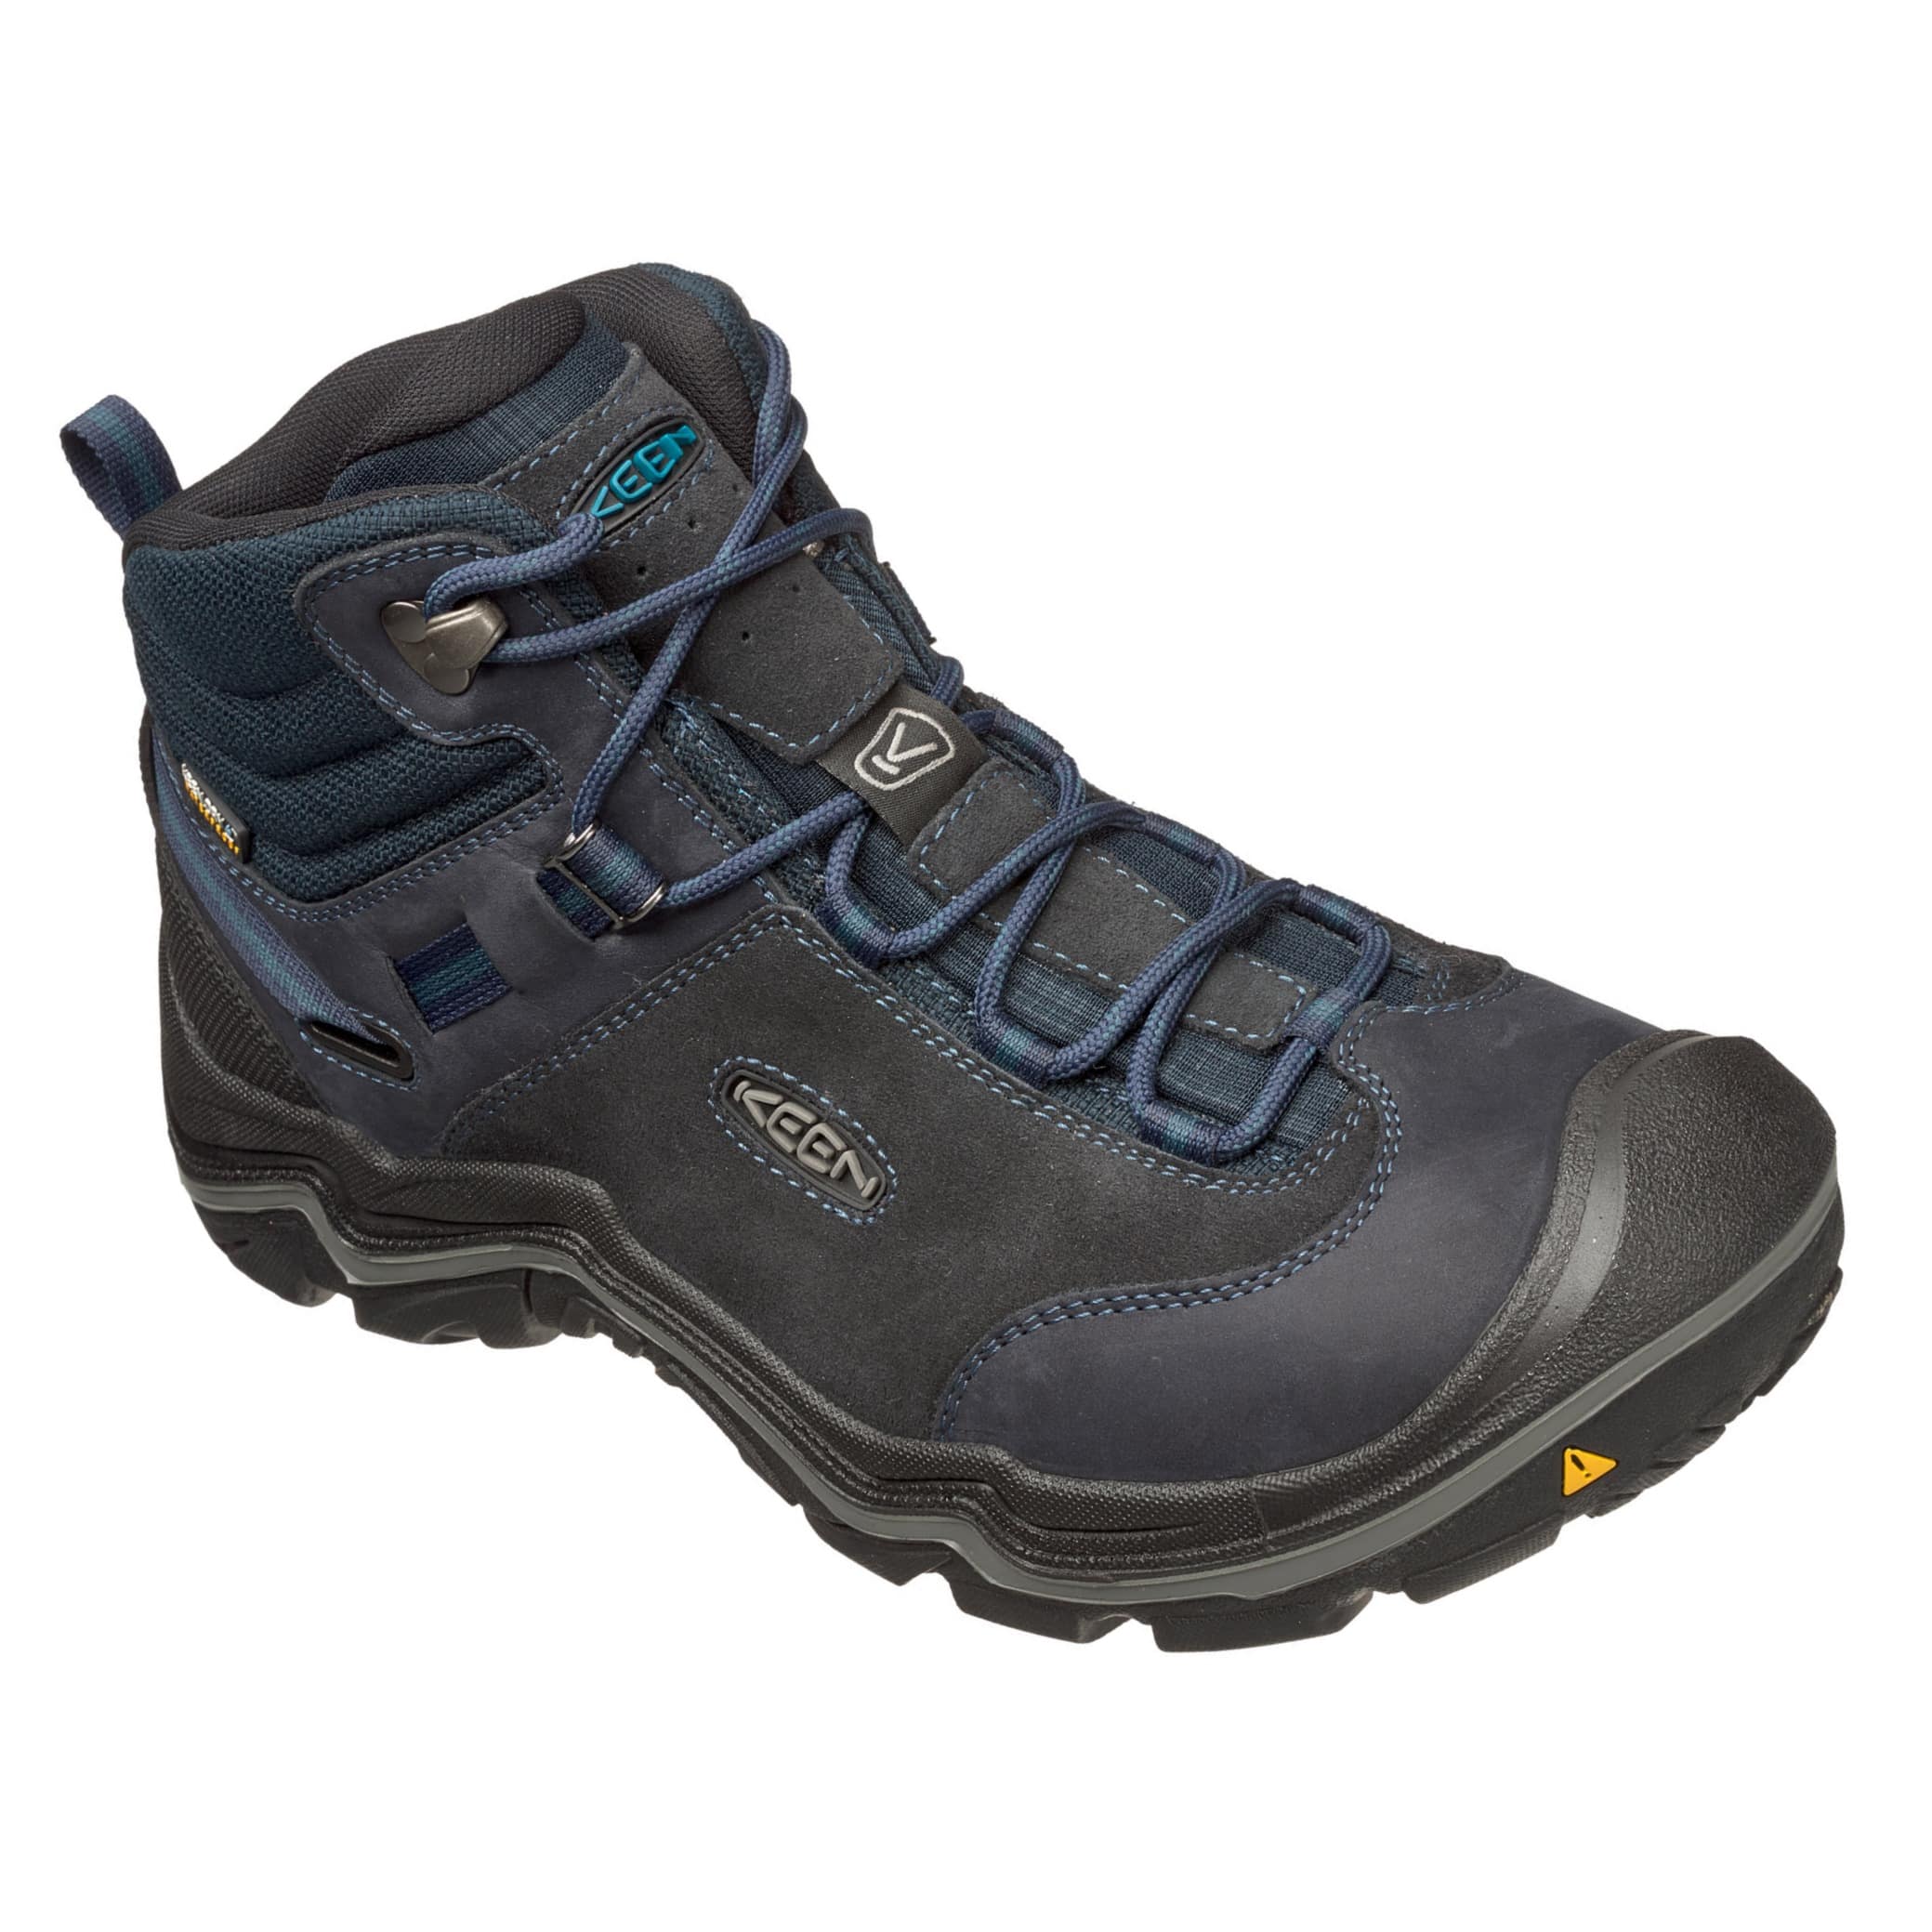 Buy Keen Wanderer Mid Wp from Outnorth